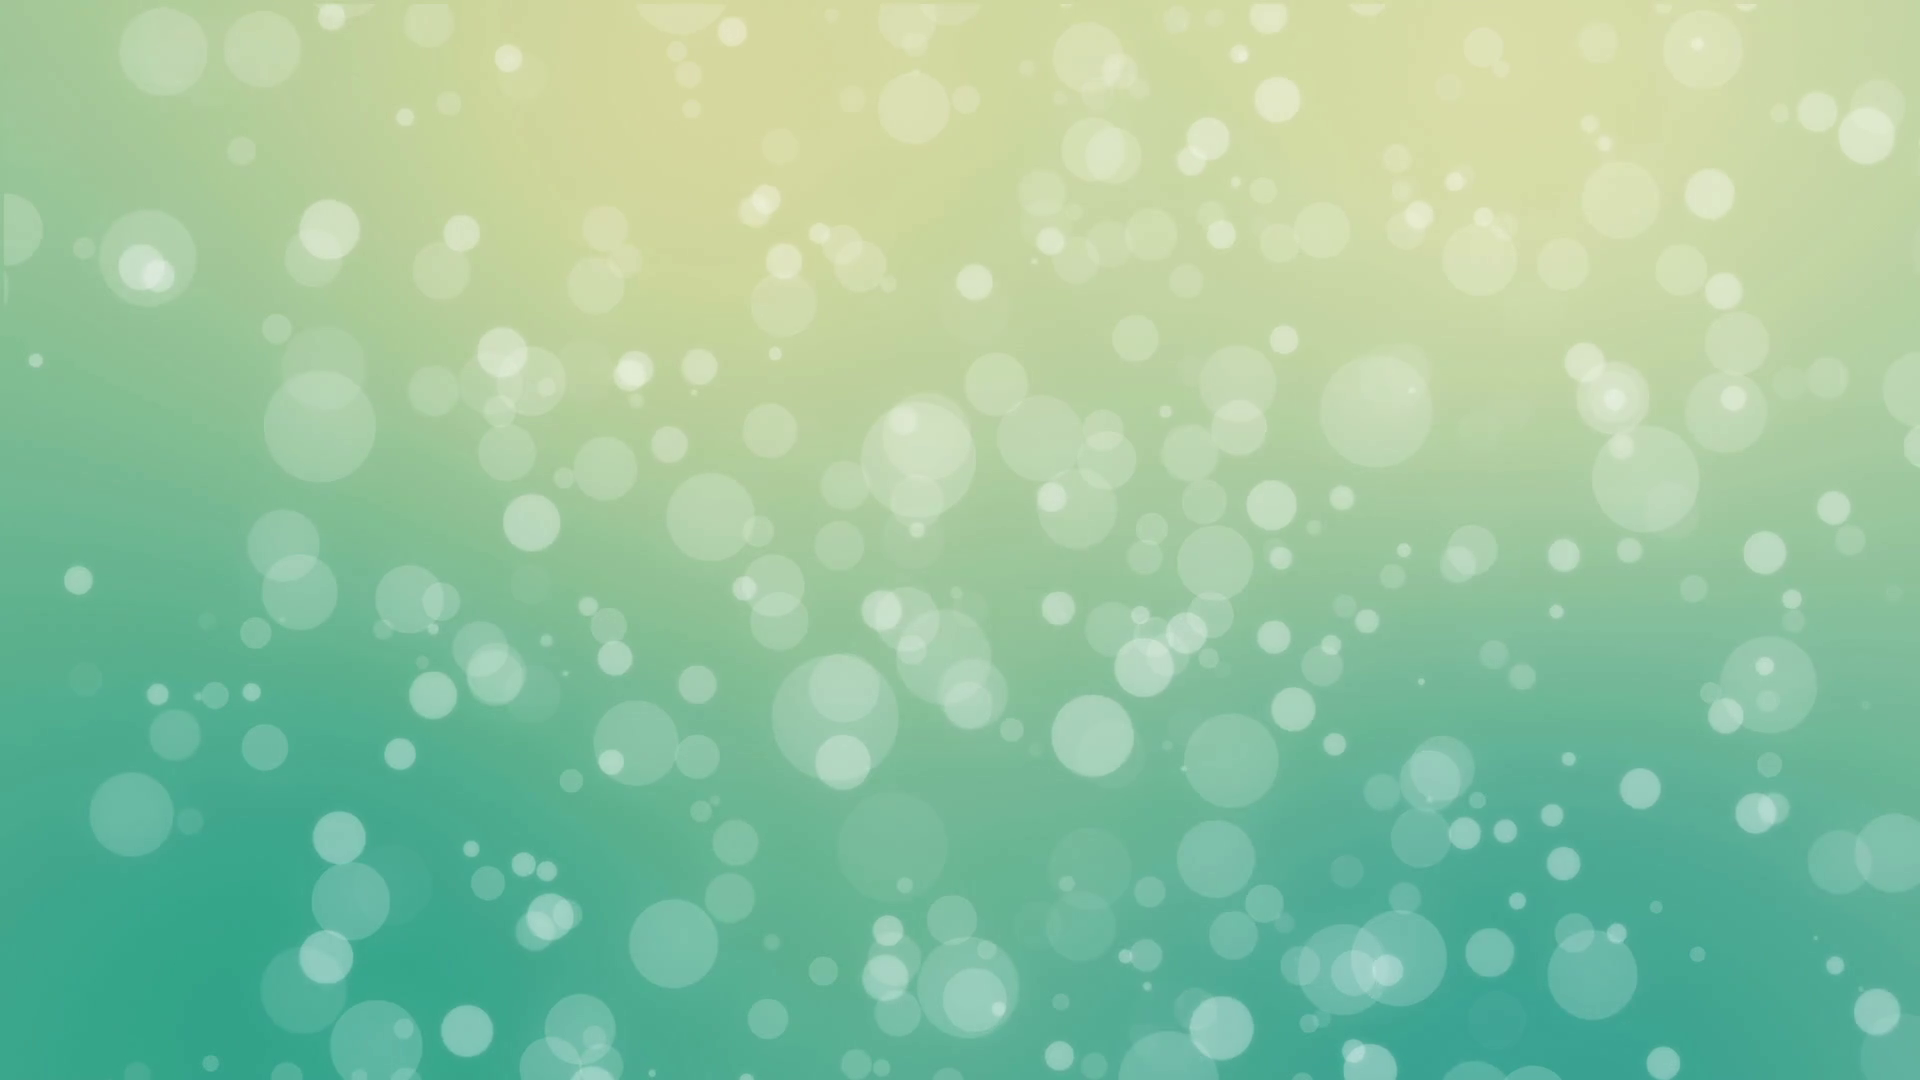 Bokeh holiday background with flickering bubbles against a gradient ...